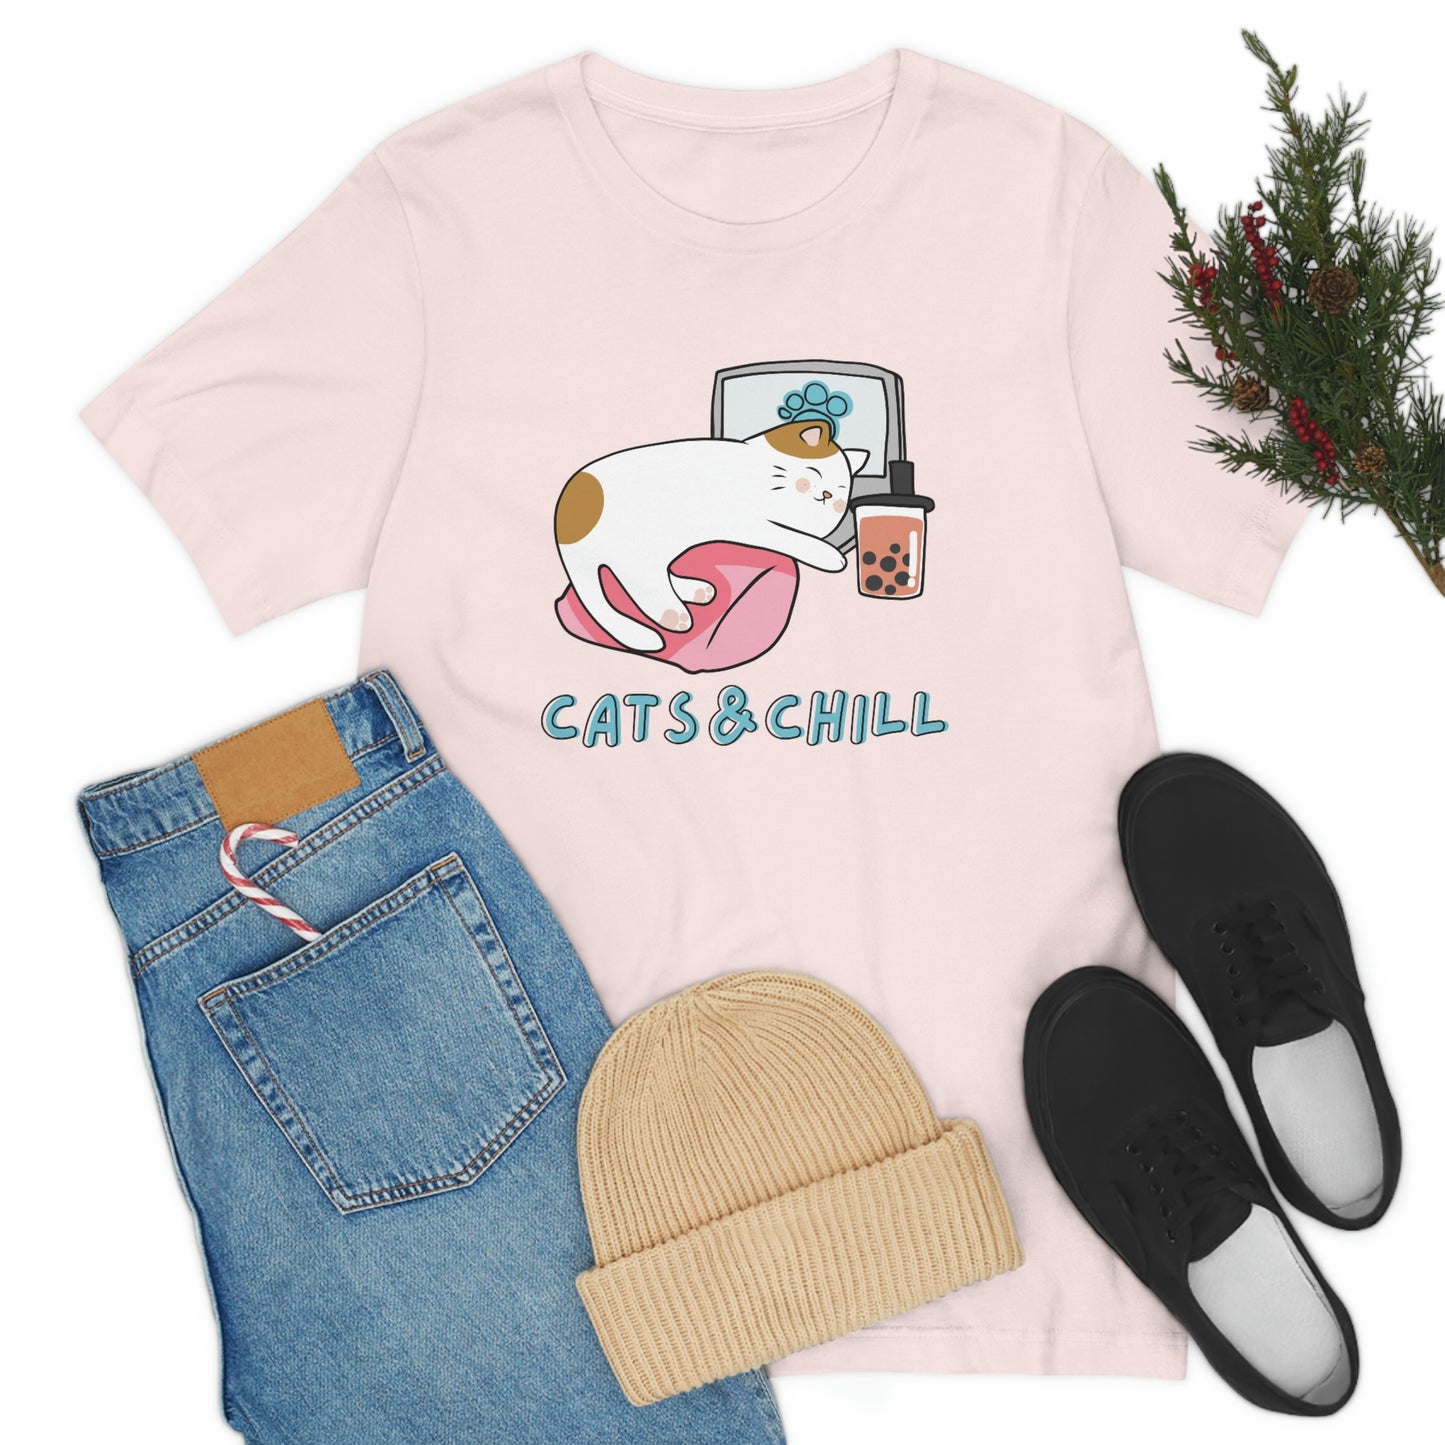 Cats and chill T-shirt